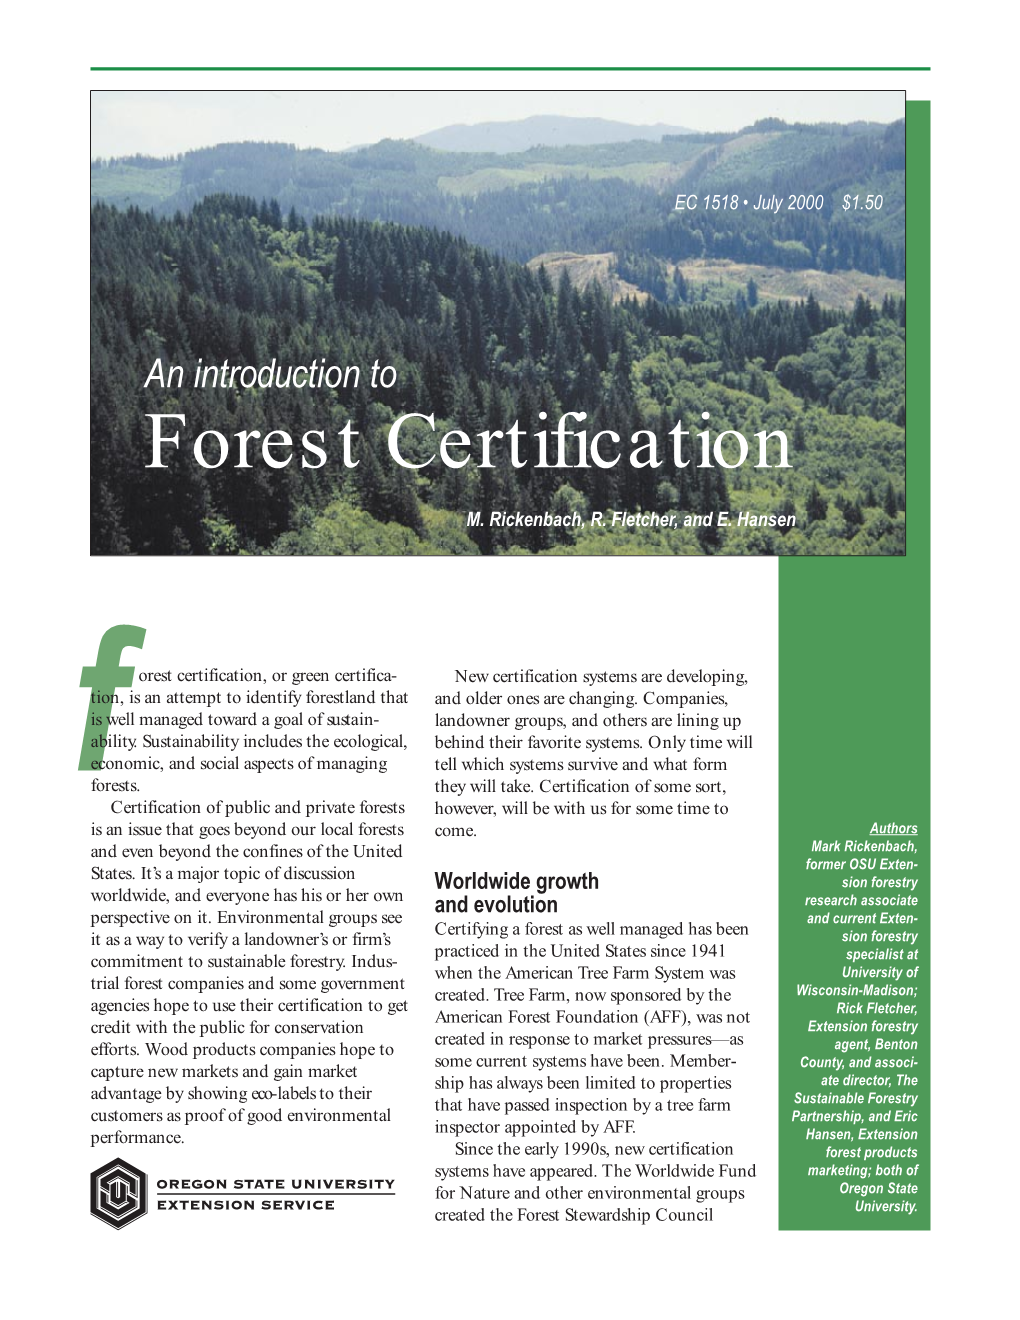 An Introduction to Forest Certification